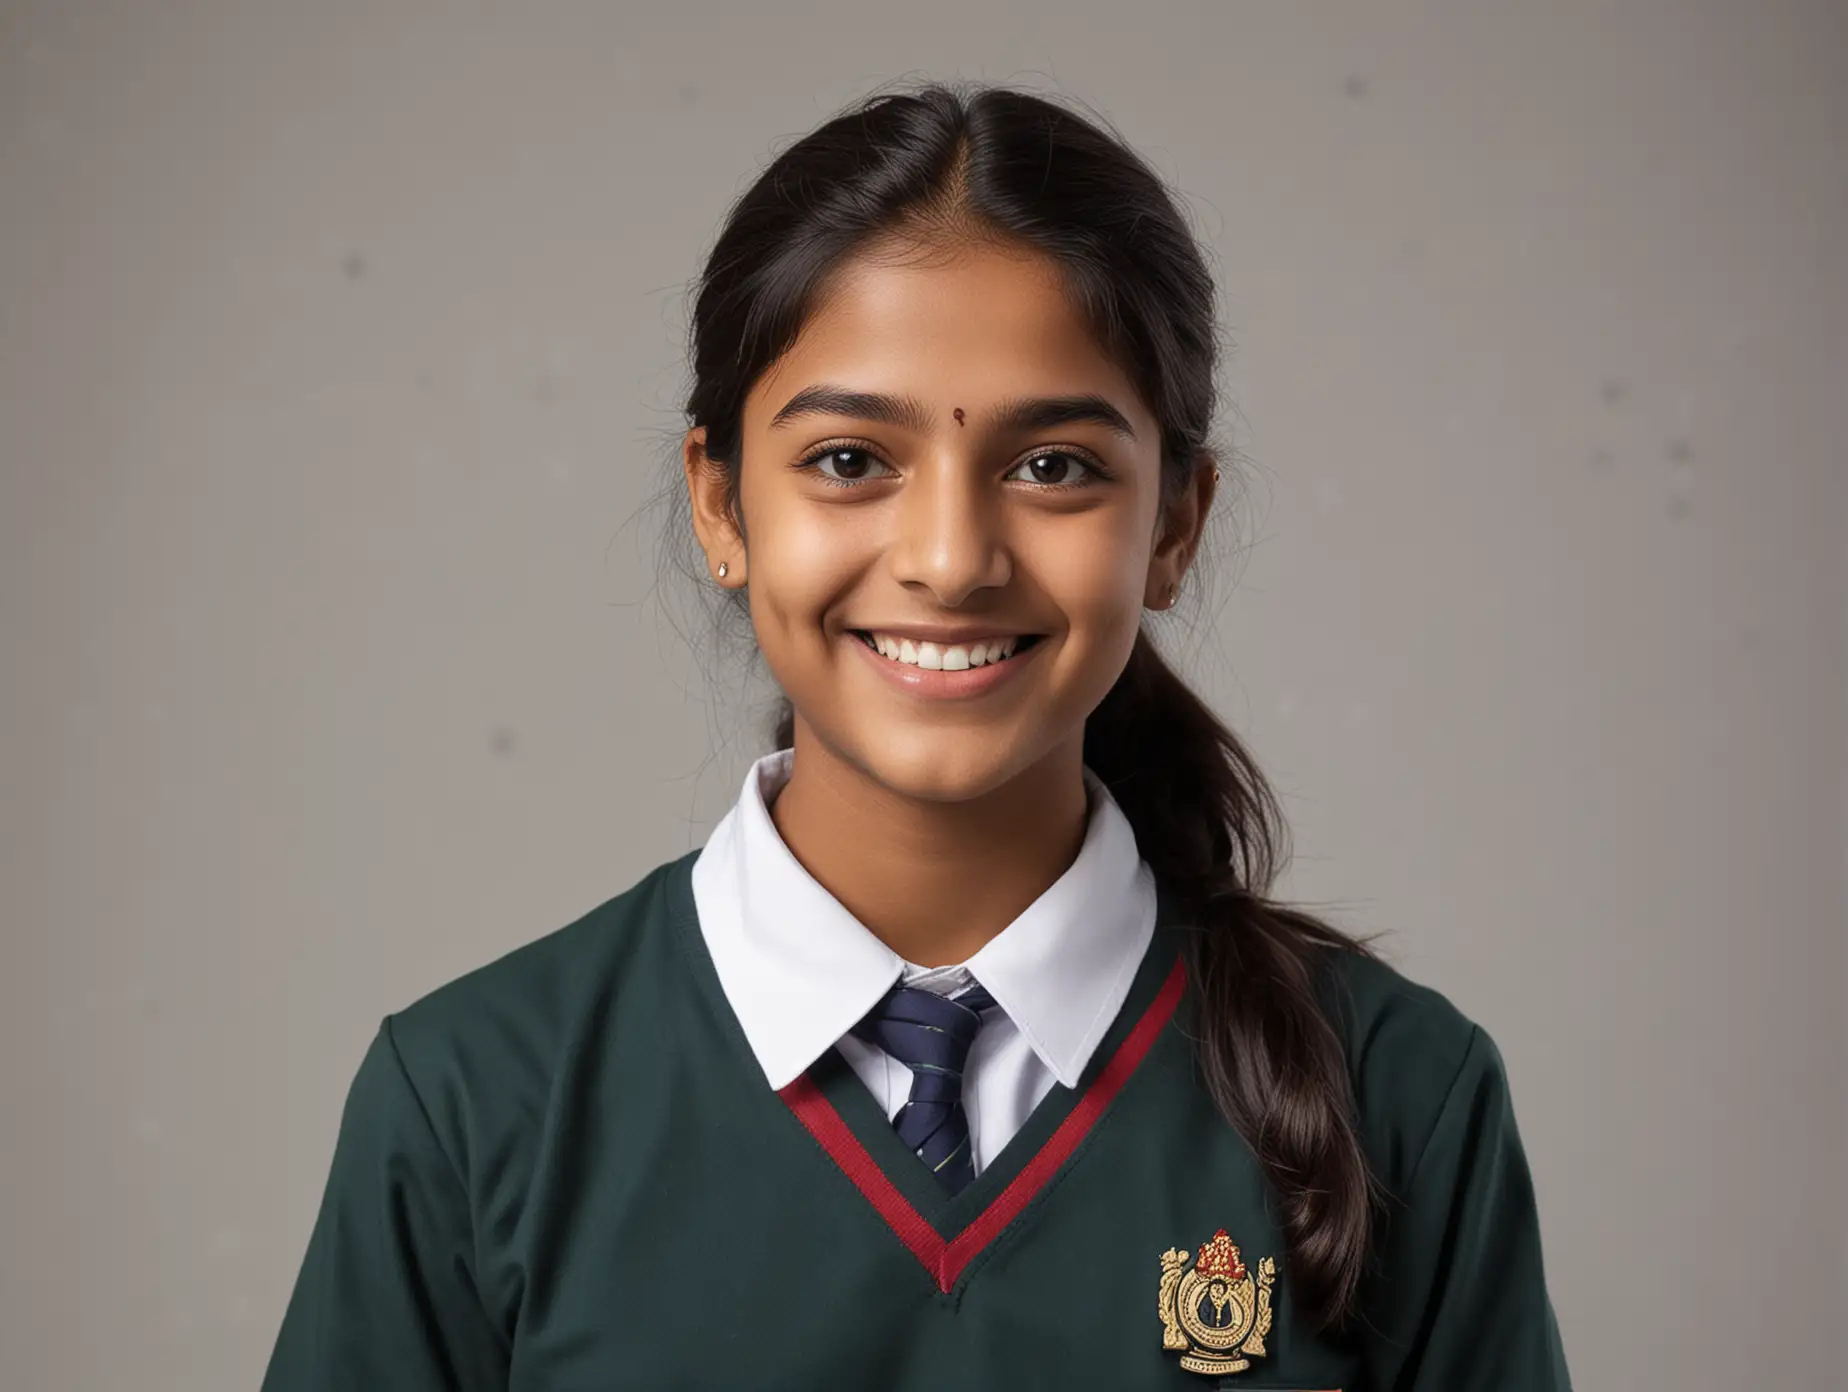 A photo of an Indian high school student, wearing a school uniform, smiling. It's a half-body shot with a clean background.